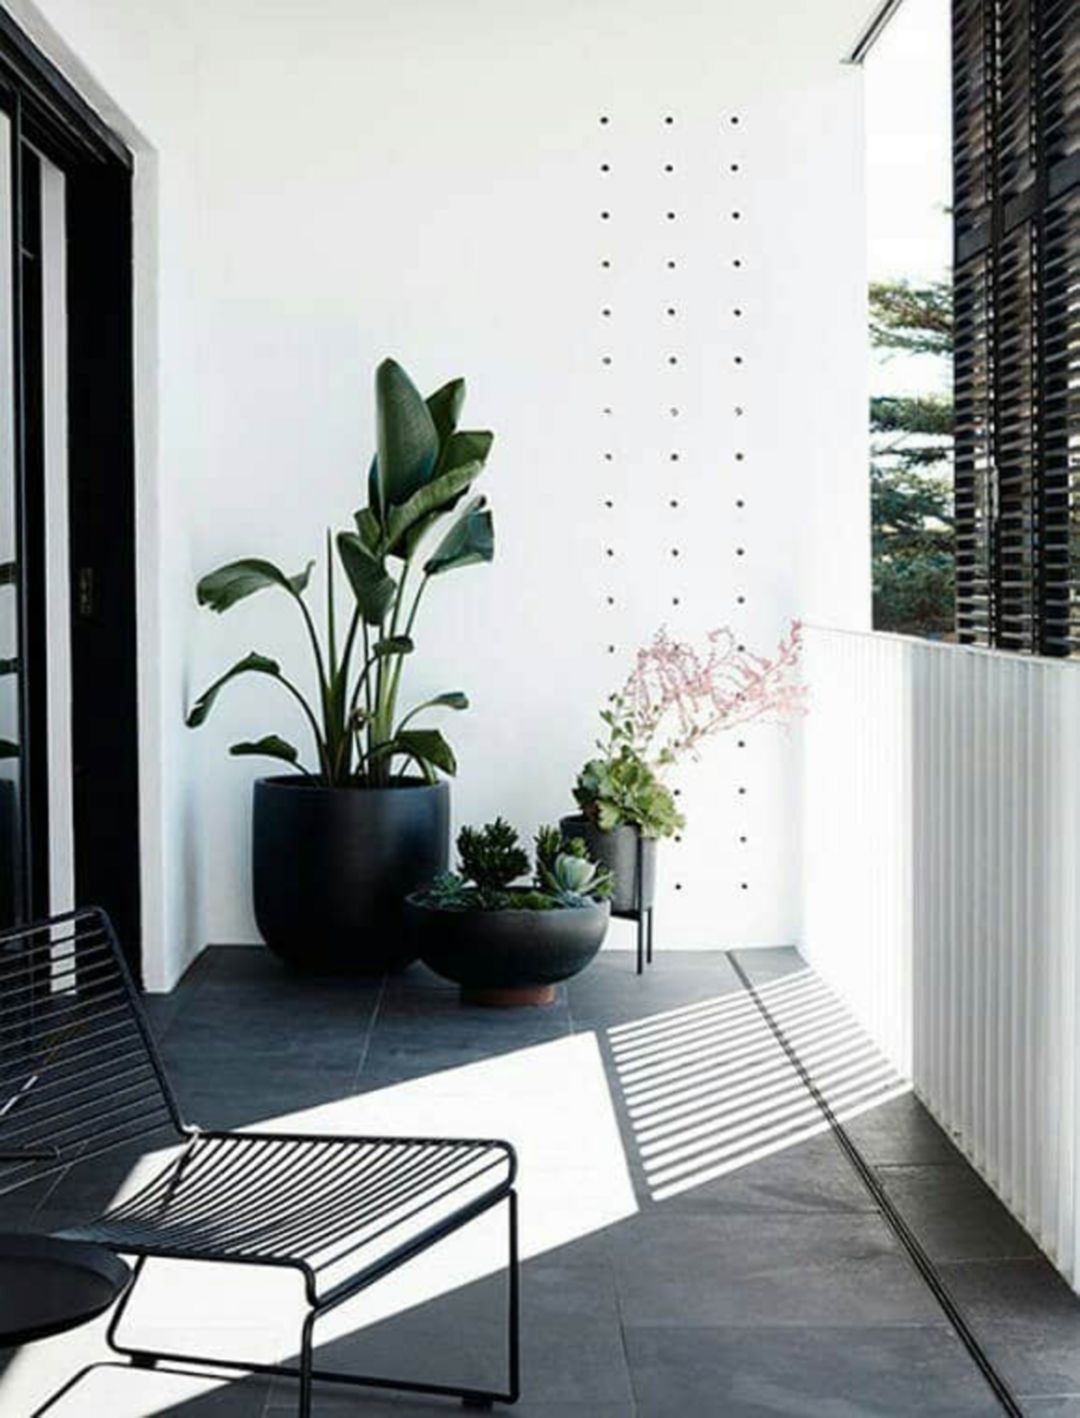 15 Beautiful and Simple Minimalist Home Porch Designs -   14 garden design Minimalist minimalism ideas